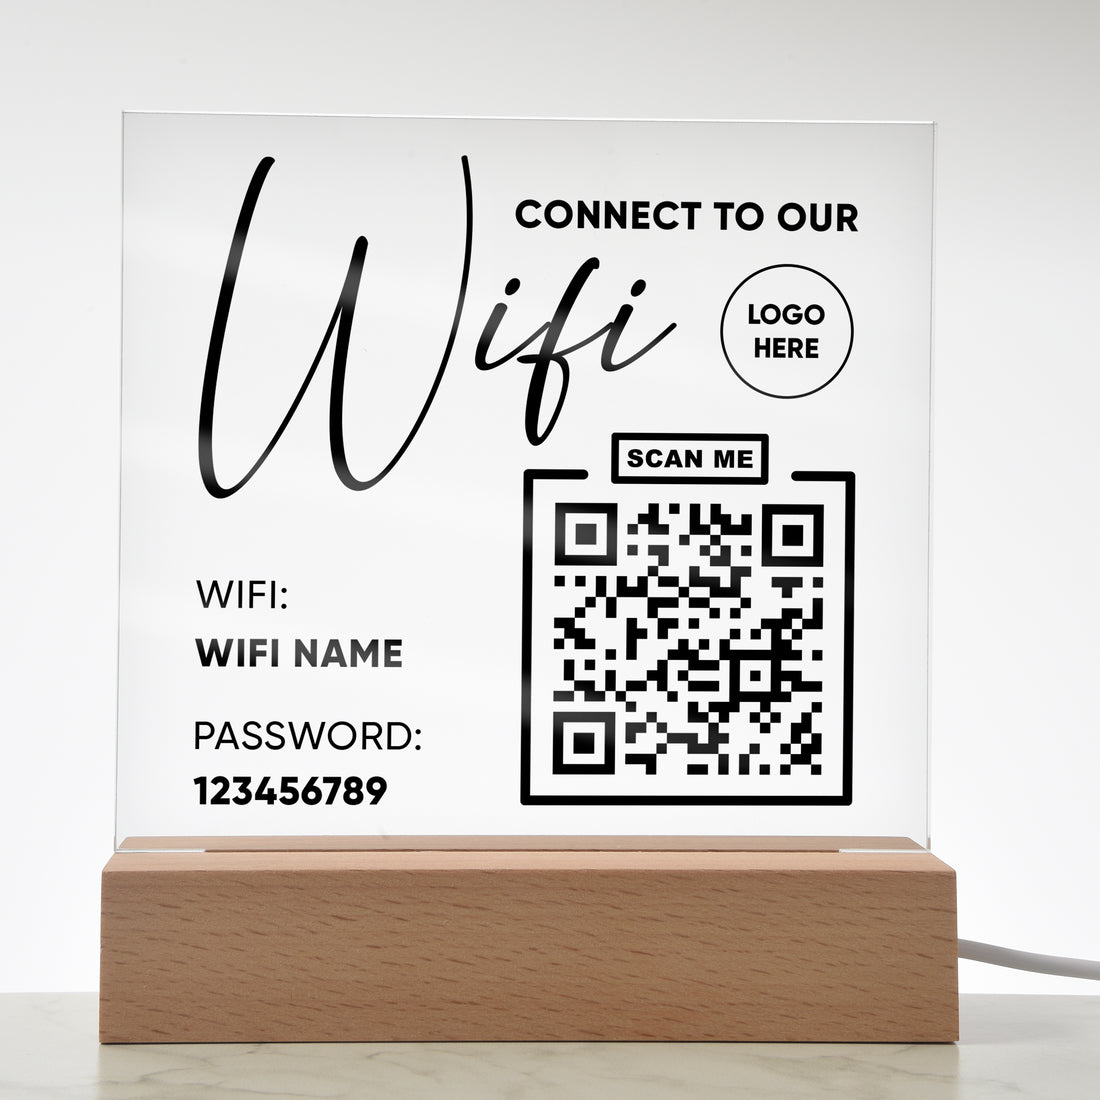 Simplify Your Wi-Fi Access with the Acrylic Plaque Connect To Our WiFi with Logo